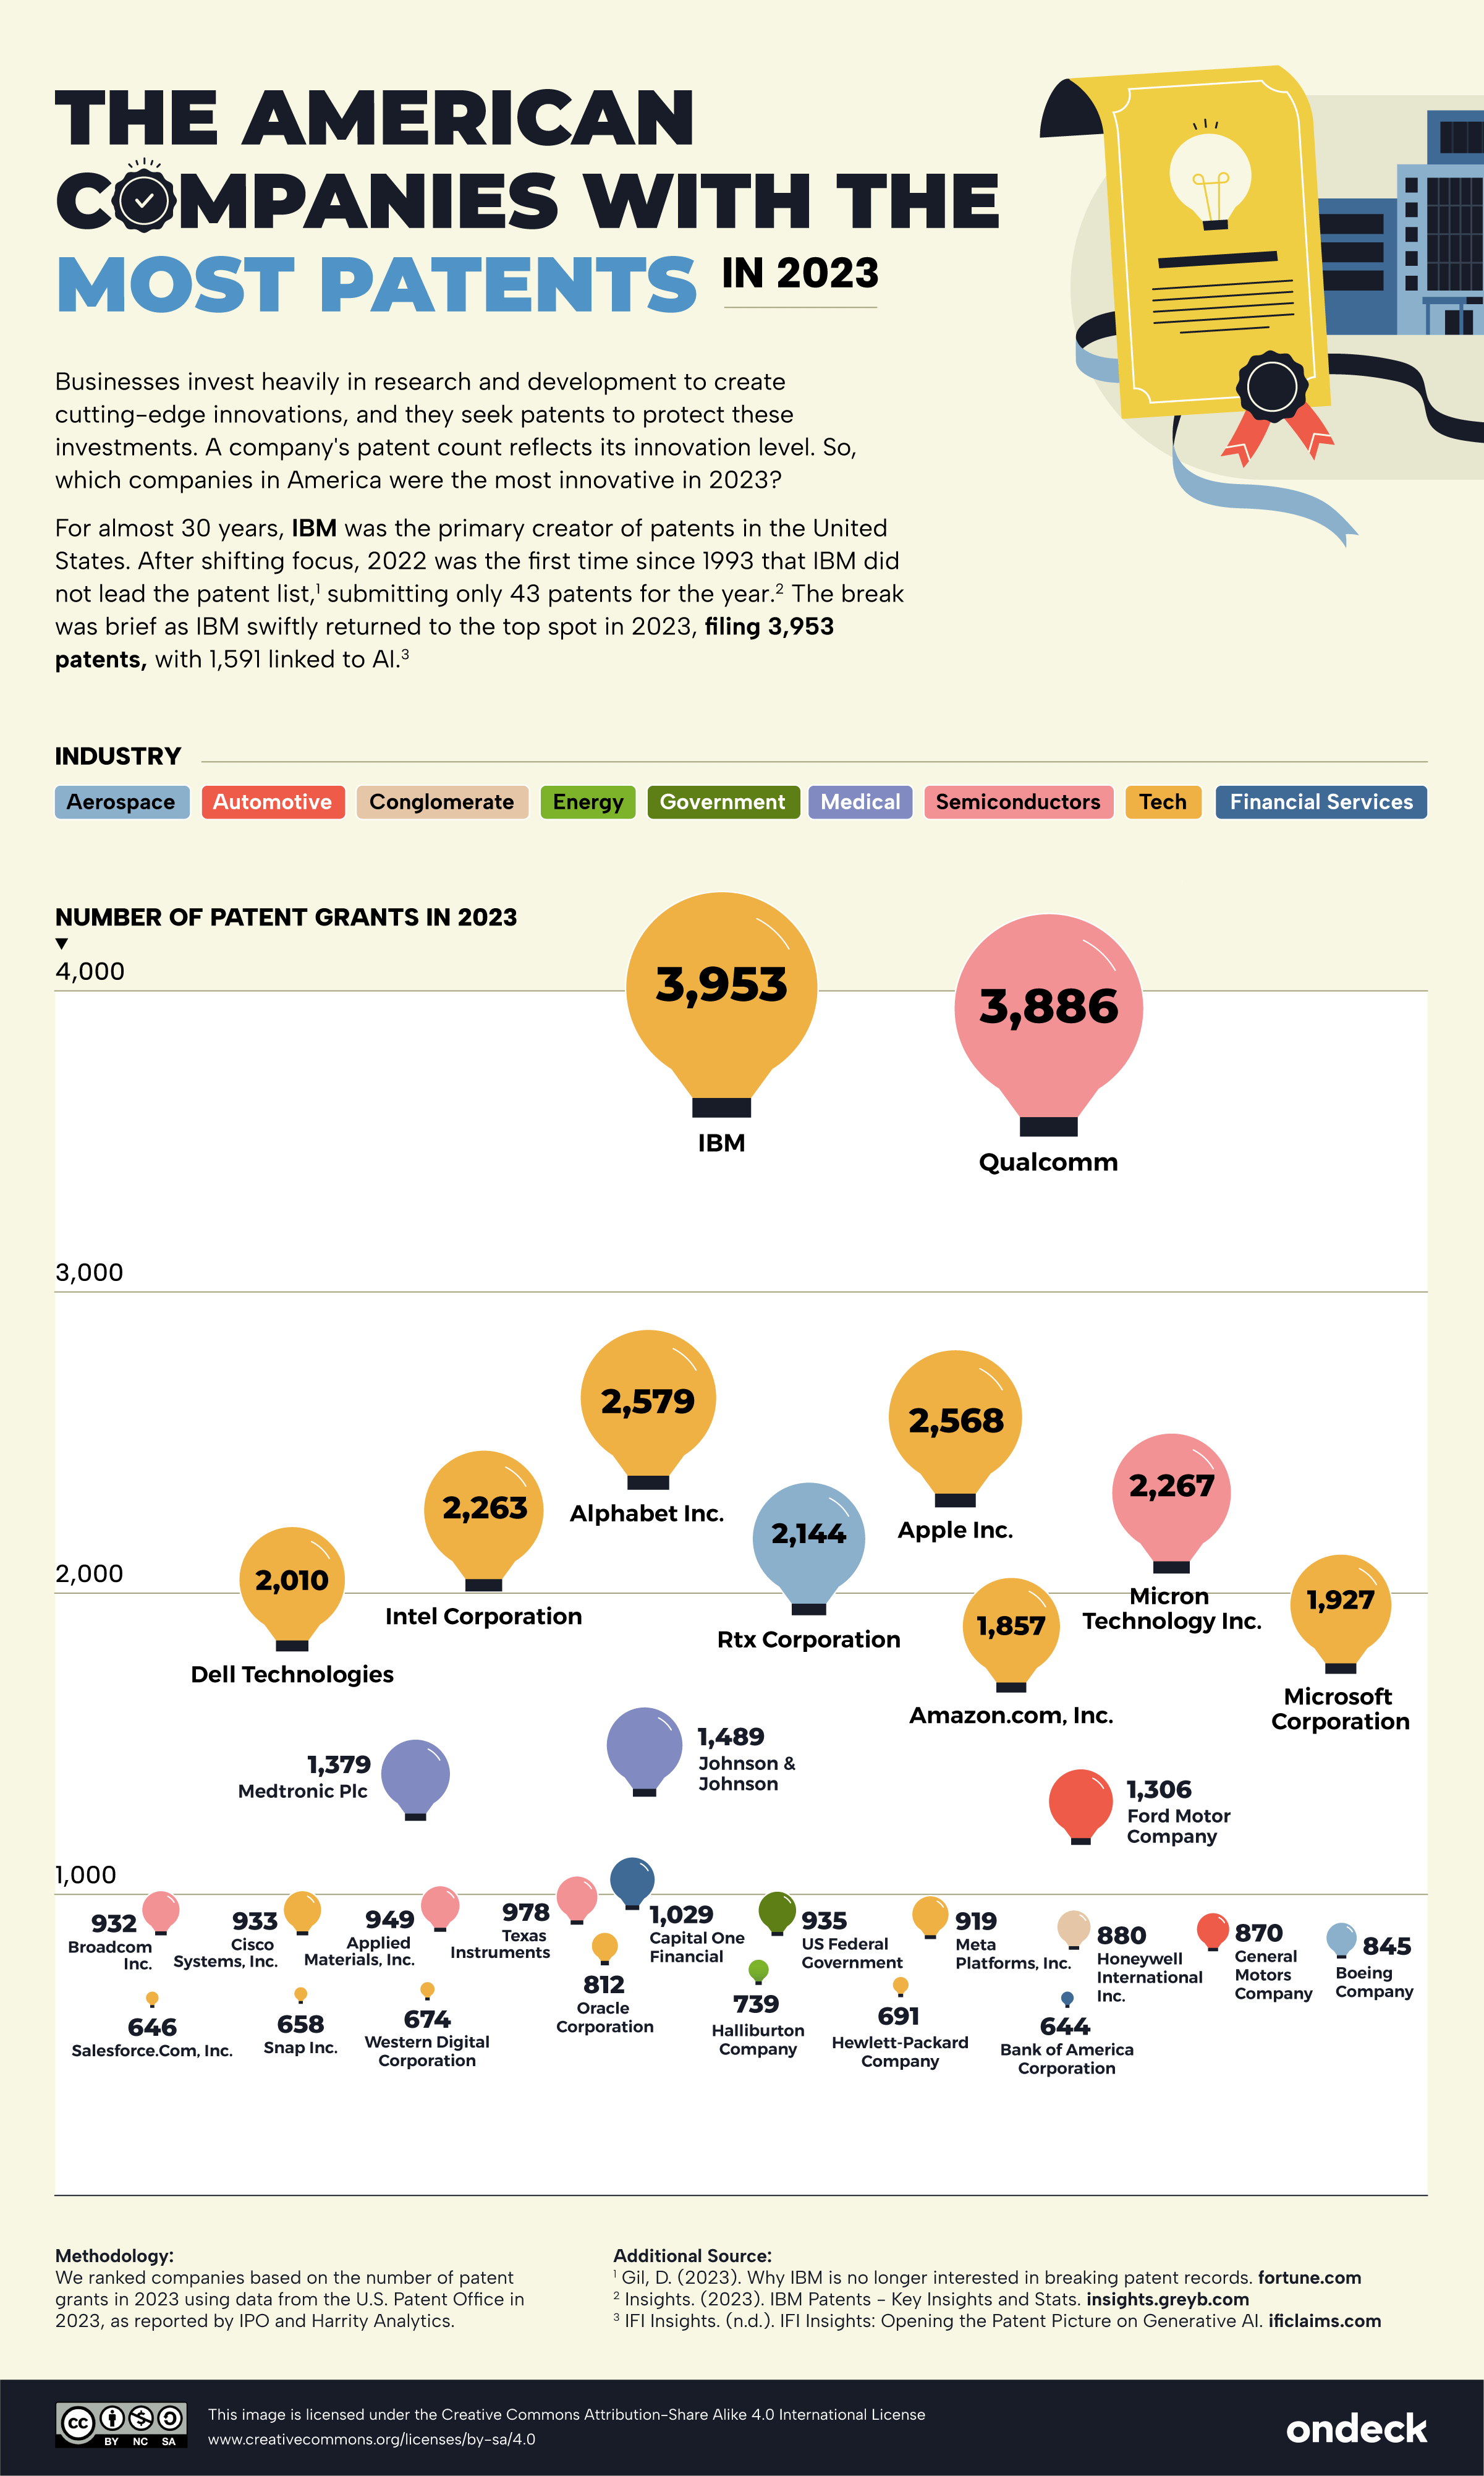 Infographic showing the American companies with the most patents in 2023